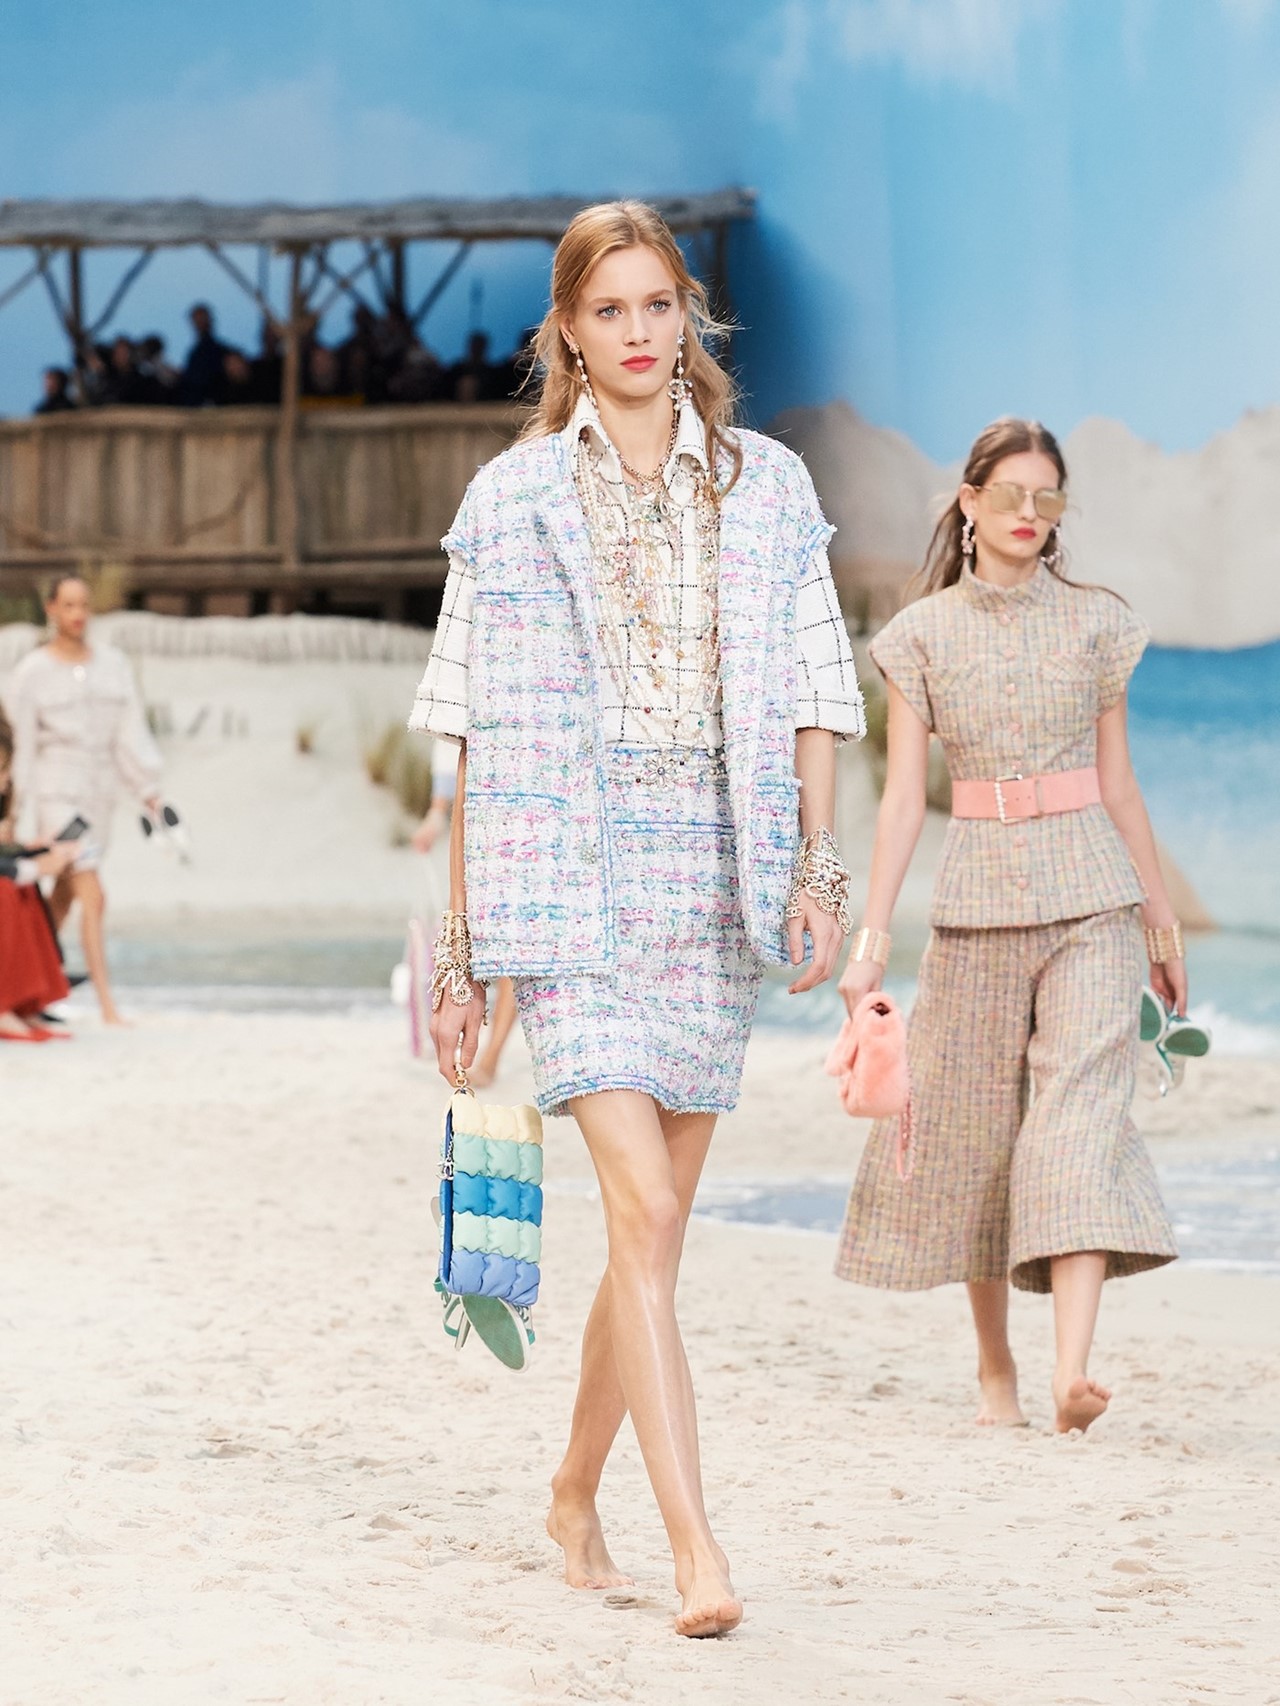 How to Dress for the Beach, According to Chanel Spring/Summer 2019